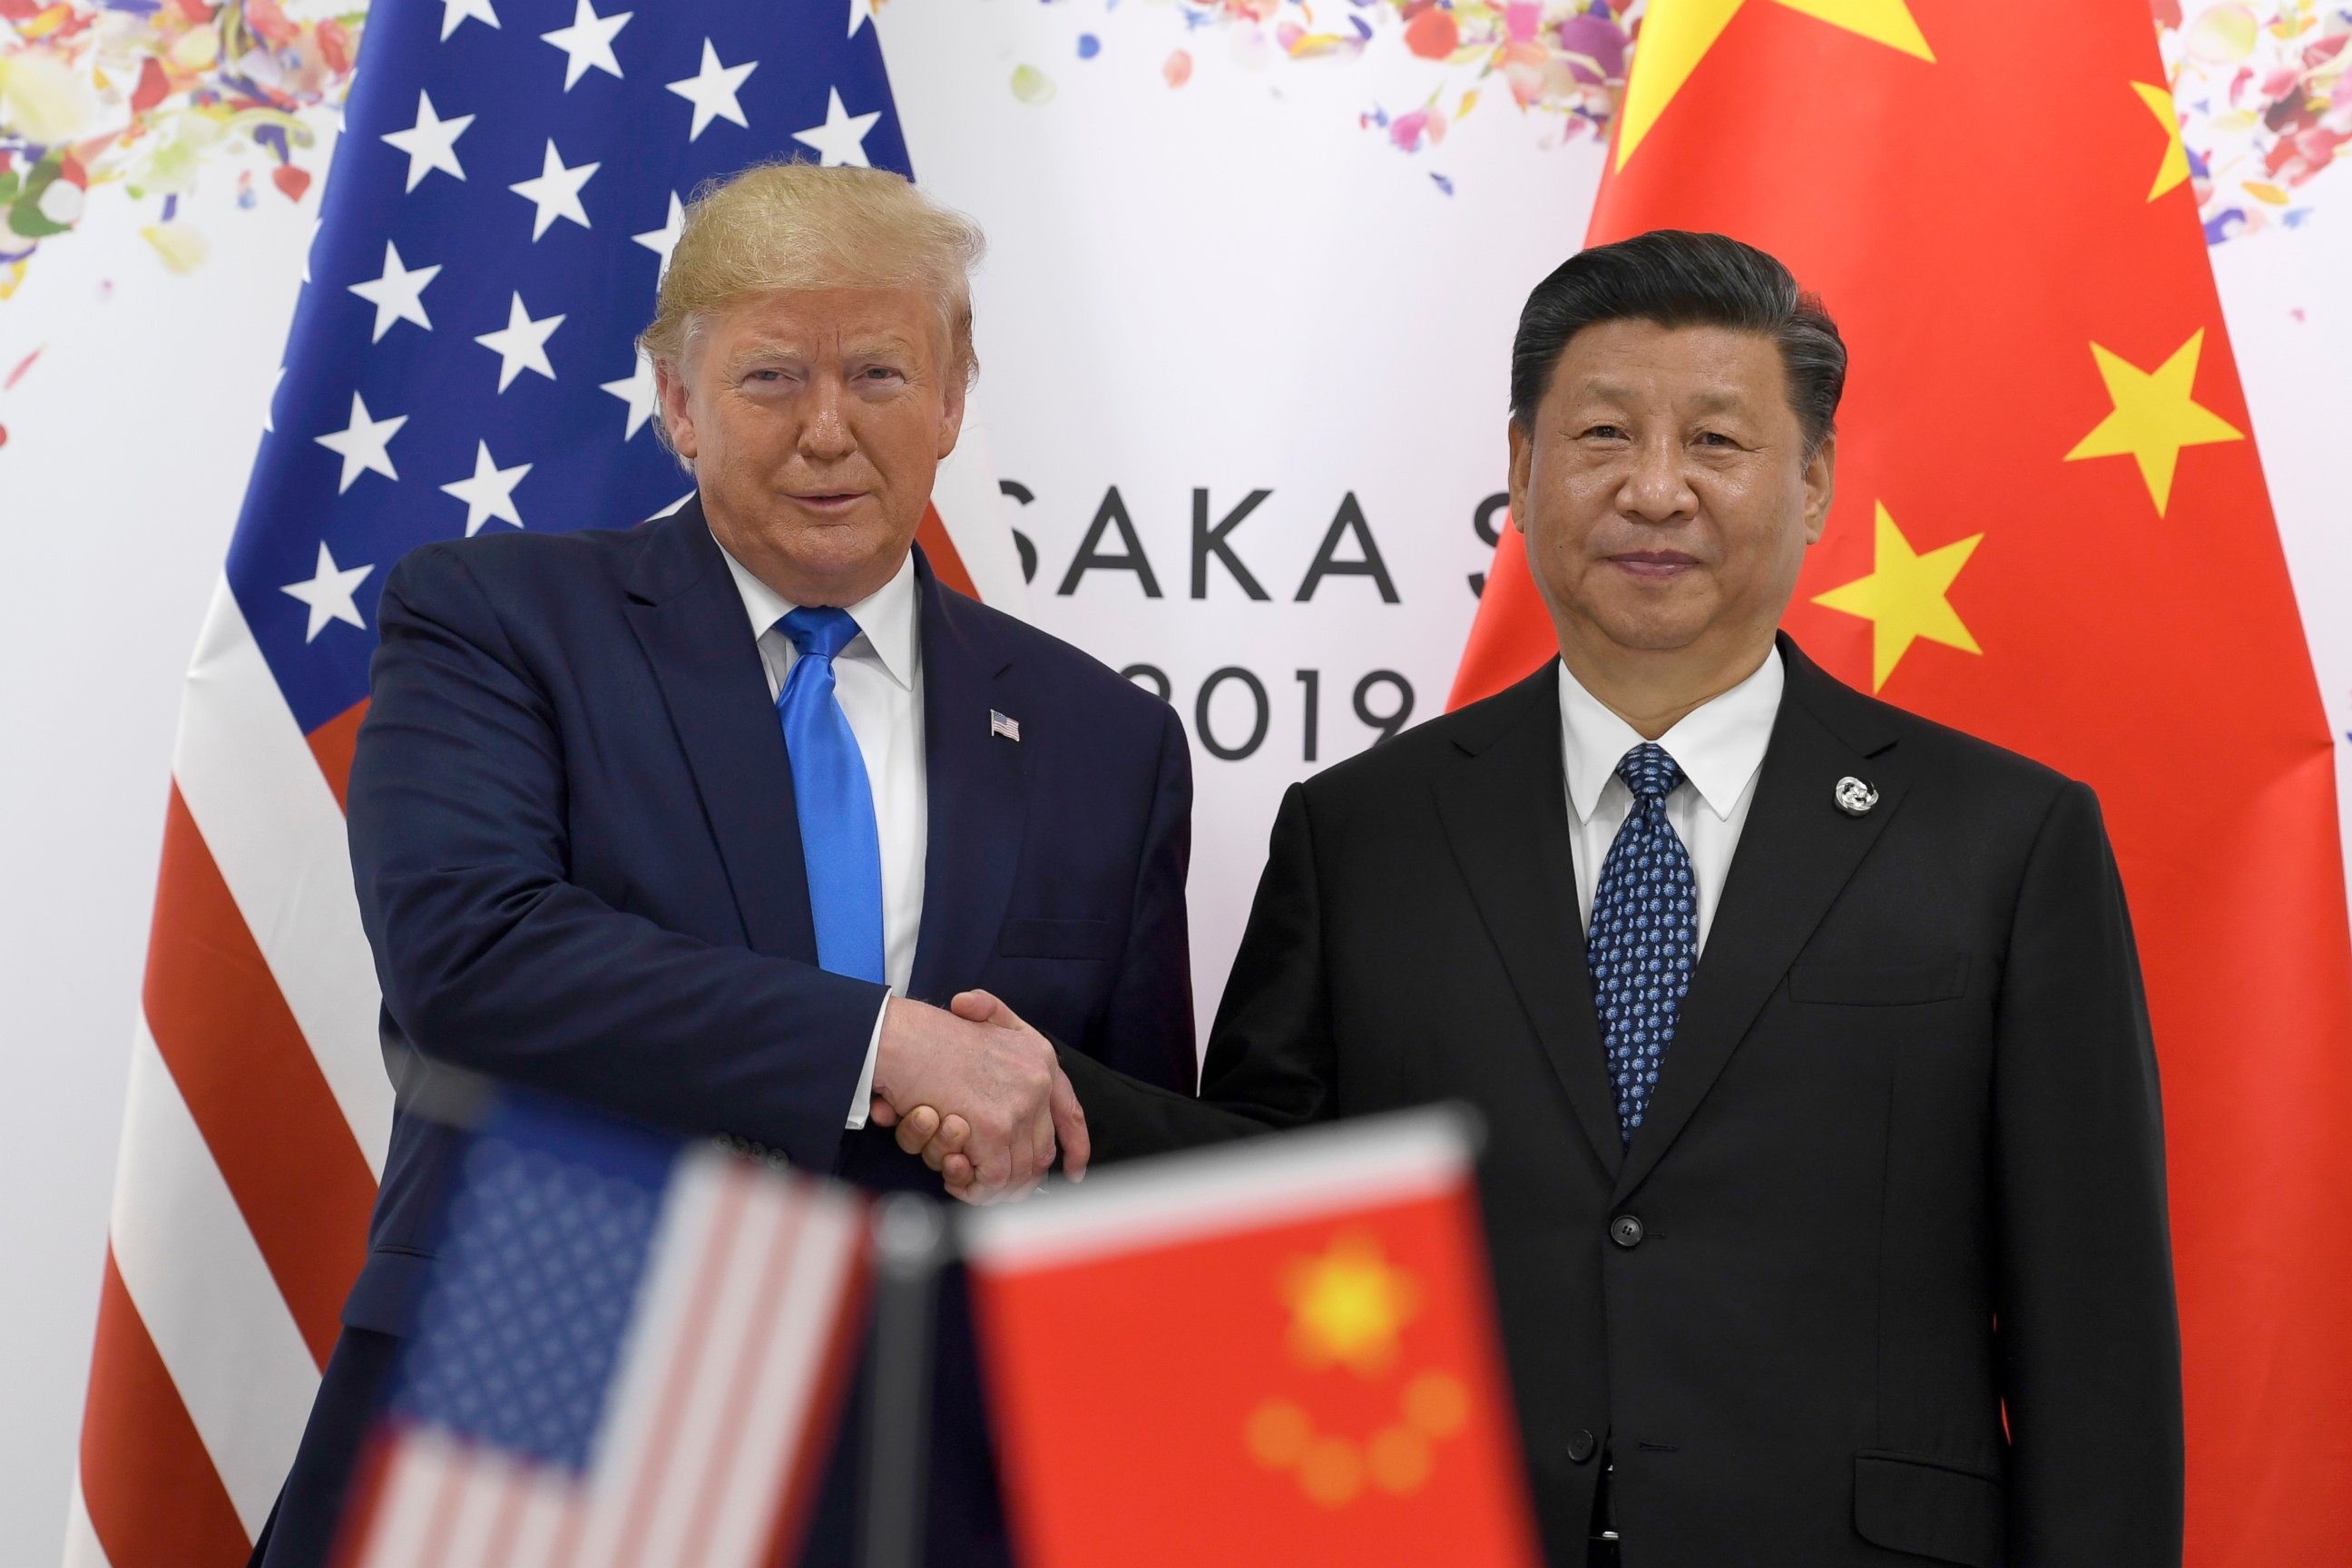 PHOTO: President Donald Trump, left, shakes hands with Chinese President Xi Jinping during a meeting on the sidelines of the G-20 summit in Osaka, Japan, Saturday, June 29, 2019.